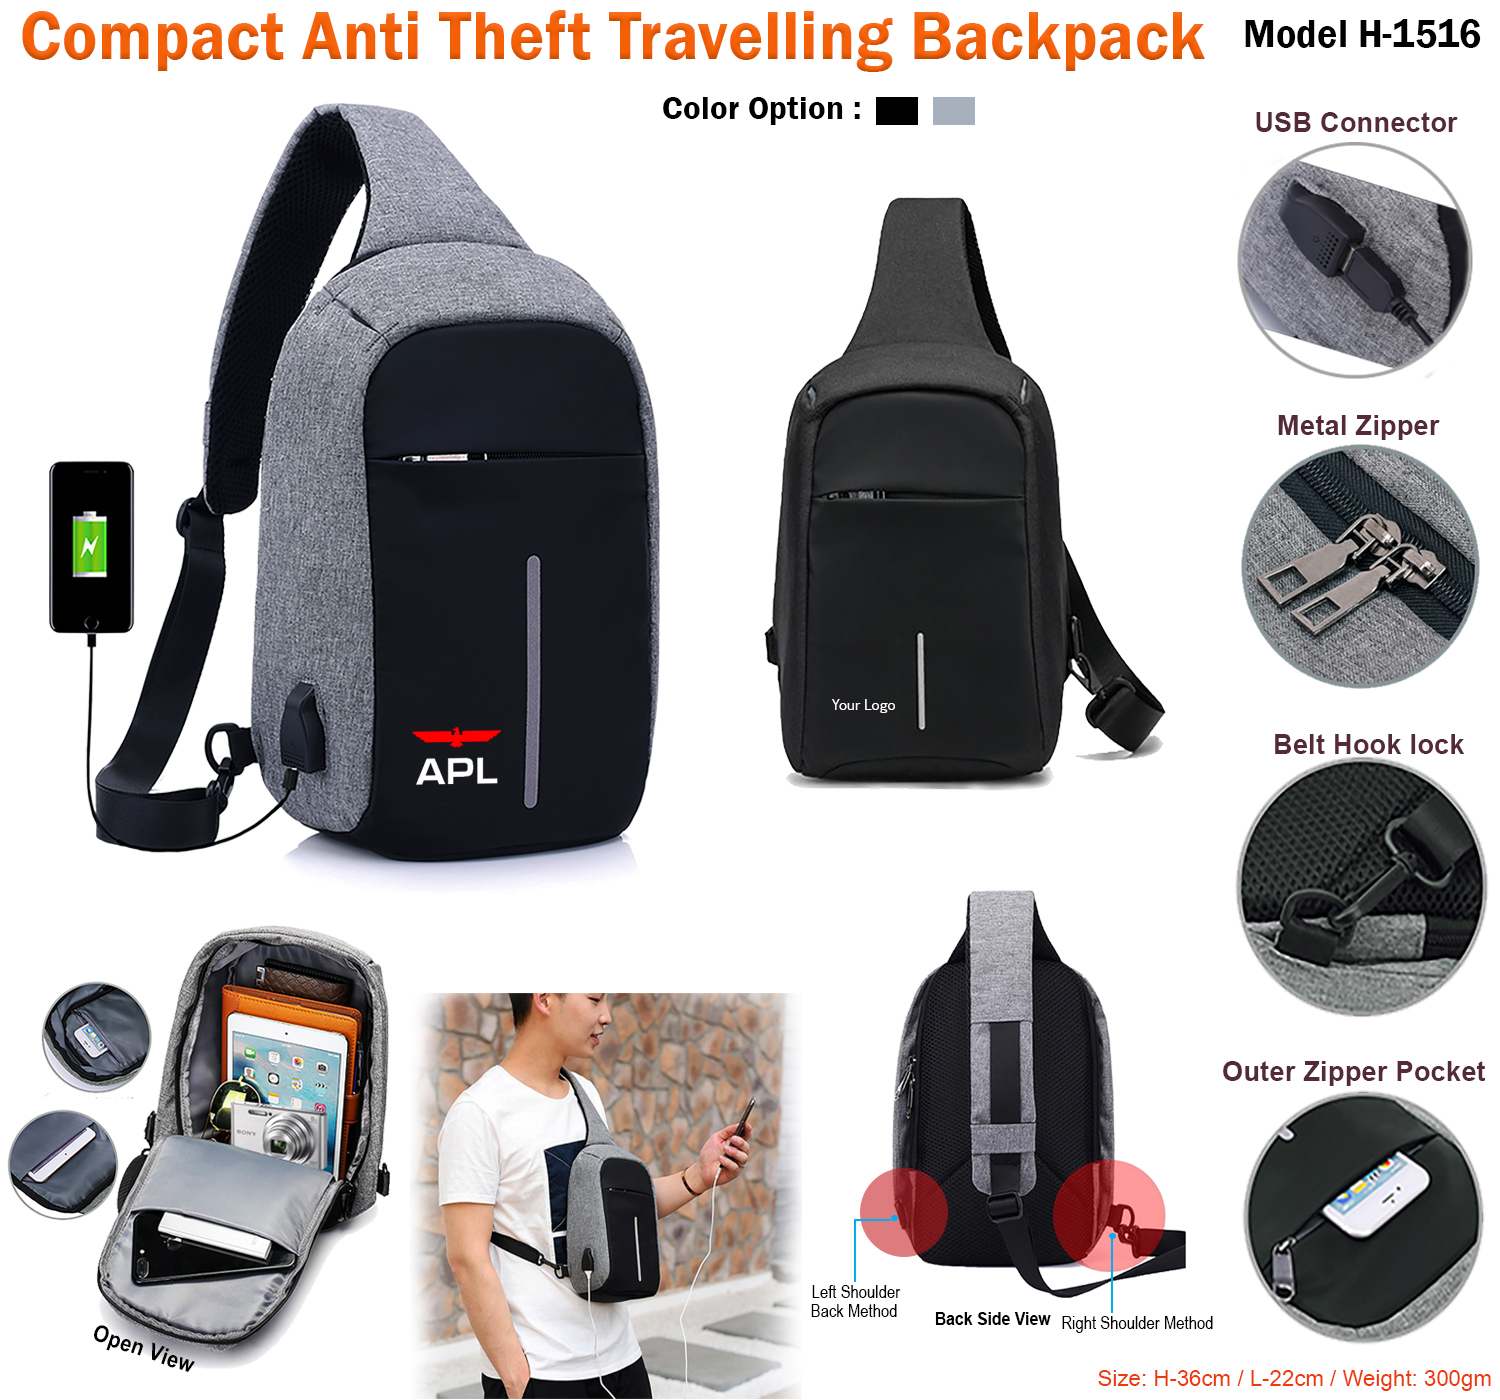 Anti-Theft Backpack | Anti-Theft Laptop Backpack | Gift Company